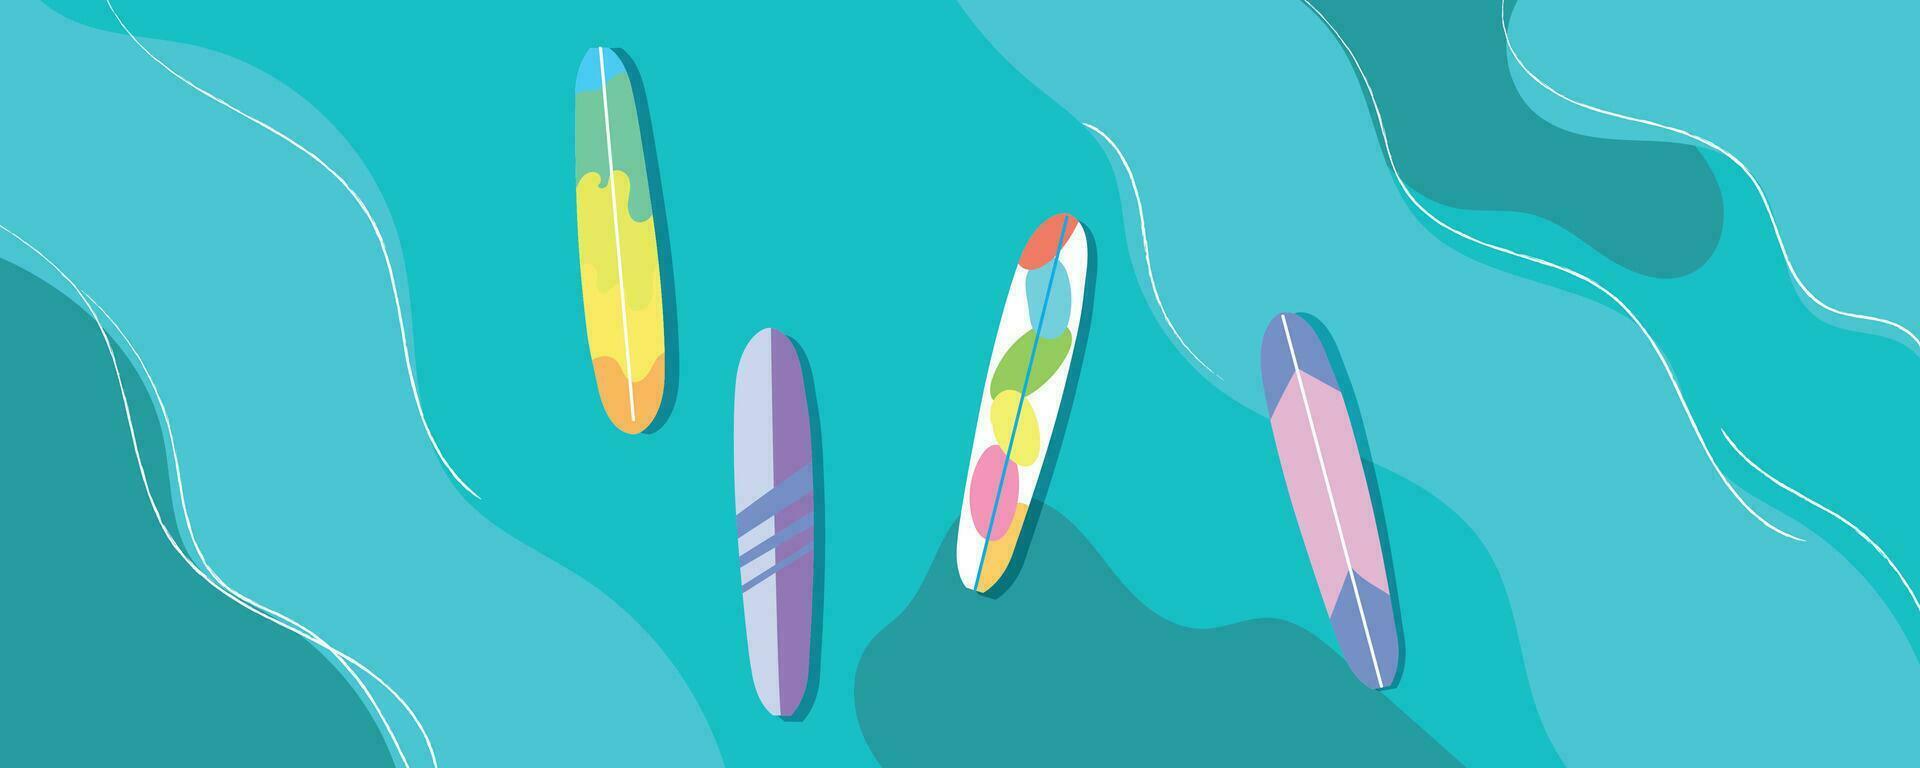 Summer sea background. Top view sea with with surfboards. Sea trip. Resort trip. Ocean relax. Summer surfing vector design.